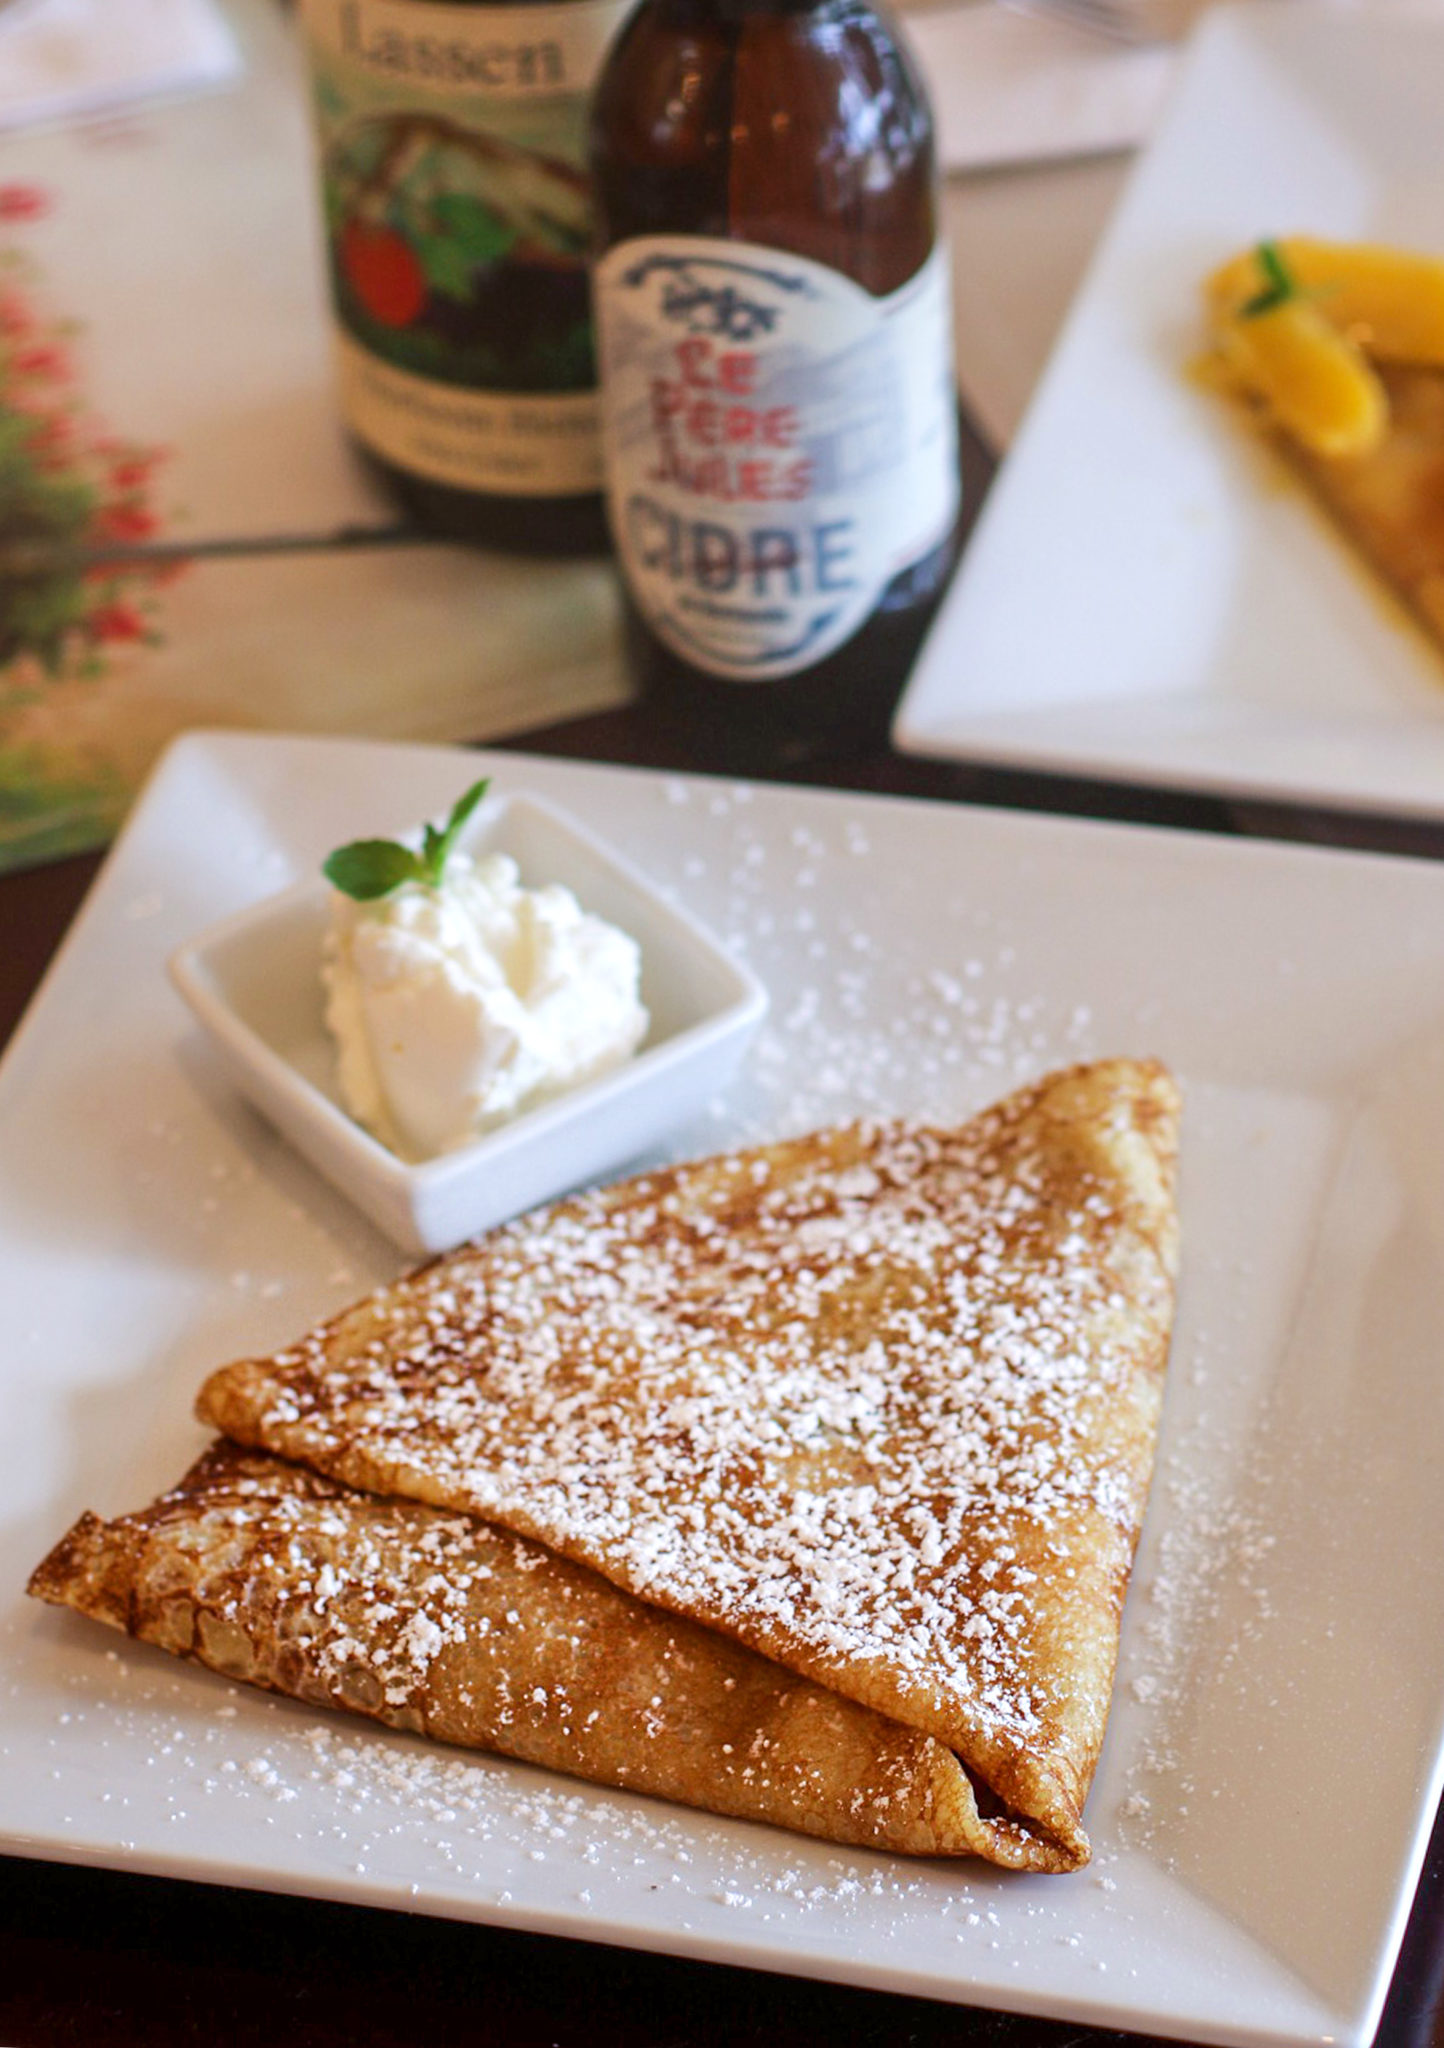 Peche Melba crepe with preserved peach, berry jam, toasted almonds, chantilly cream at Creperie Chez Solange in Larkfield. Heather Irwin/PD.